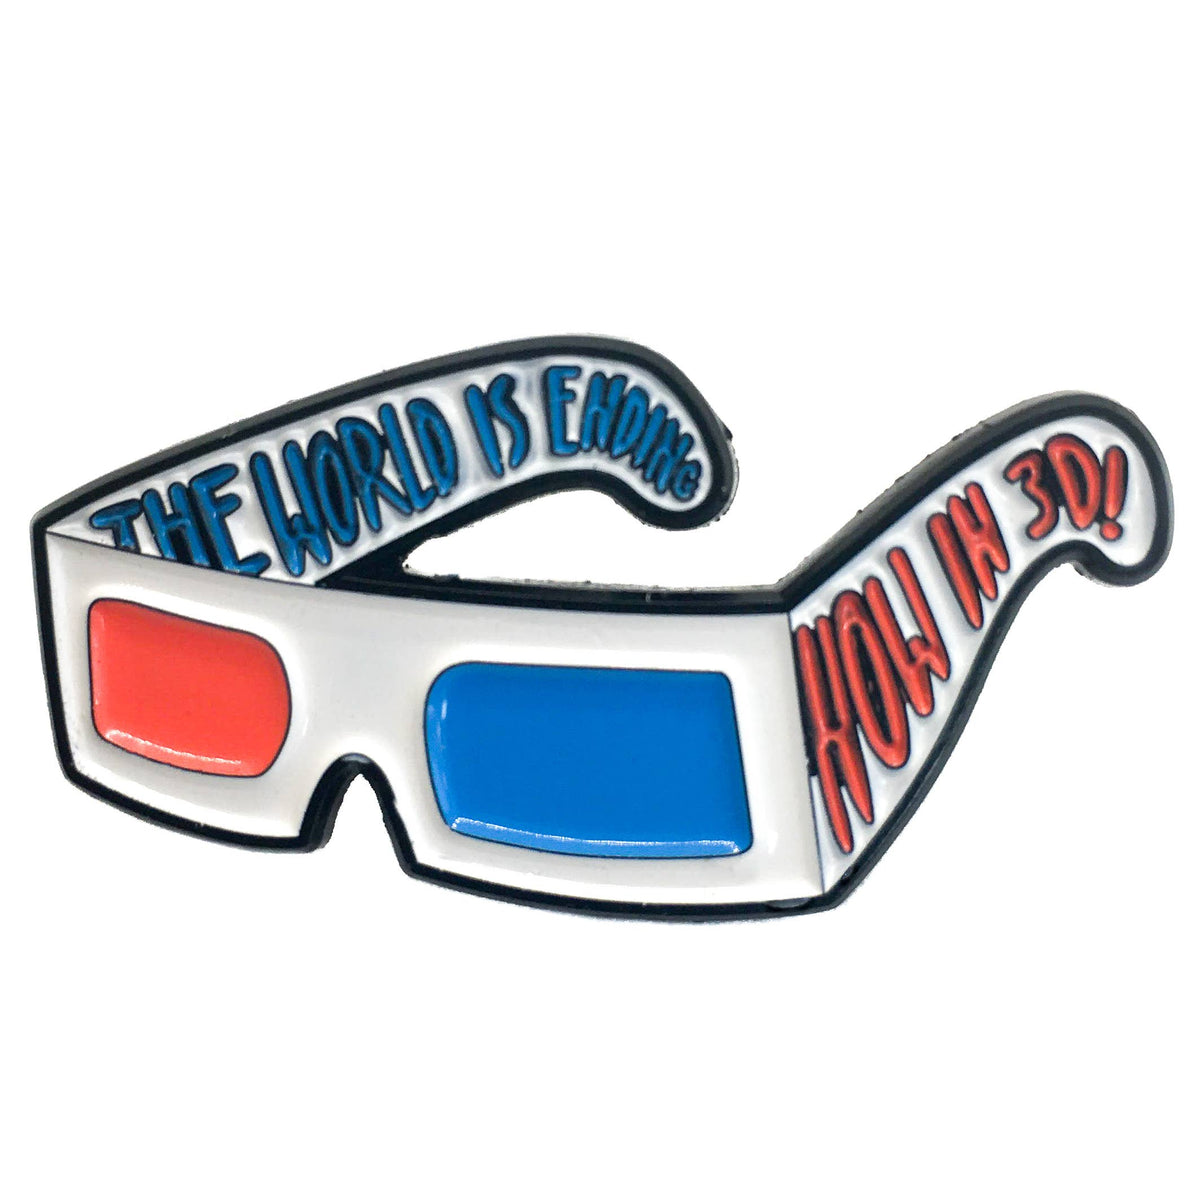 "The World is Ending - Now in 3D!" 3D Glasses Enamel Pin